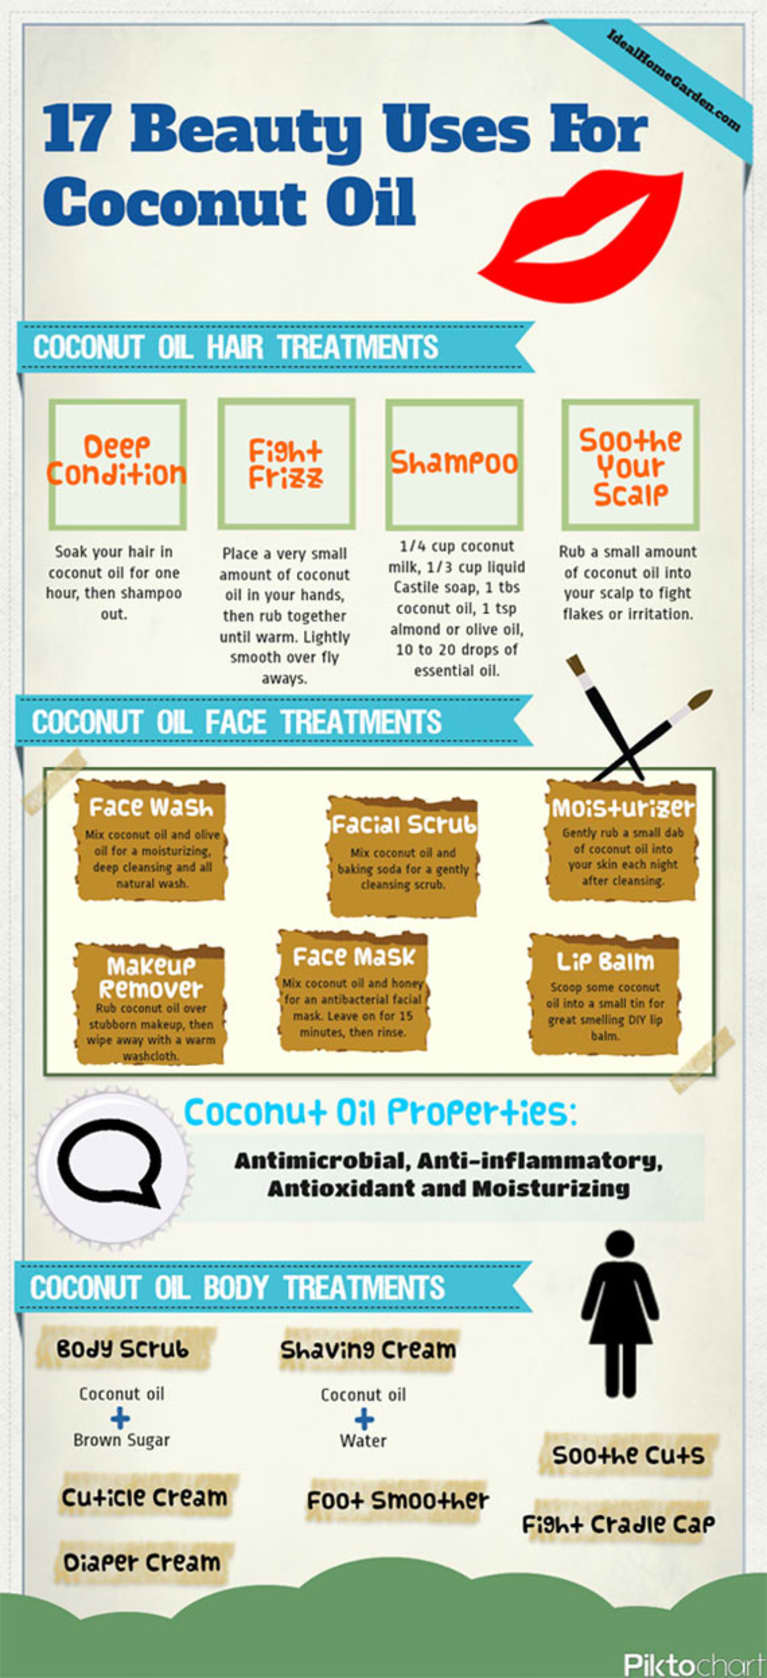 17 Beauty Uses For Coconut Oil (Infographic)